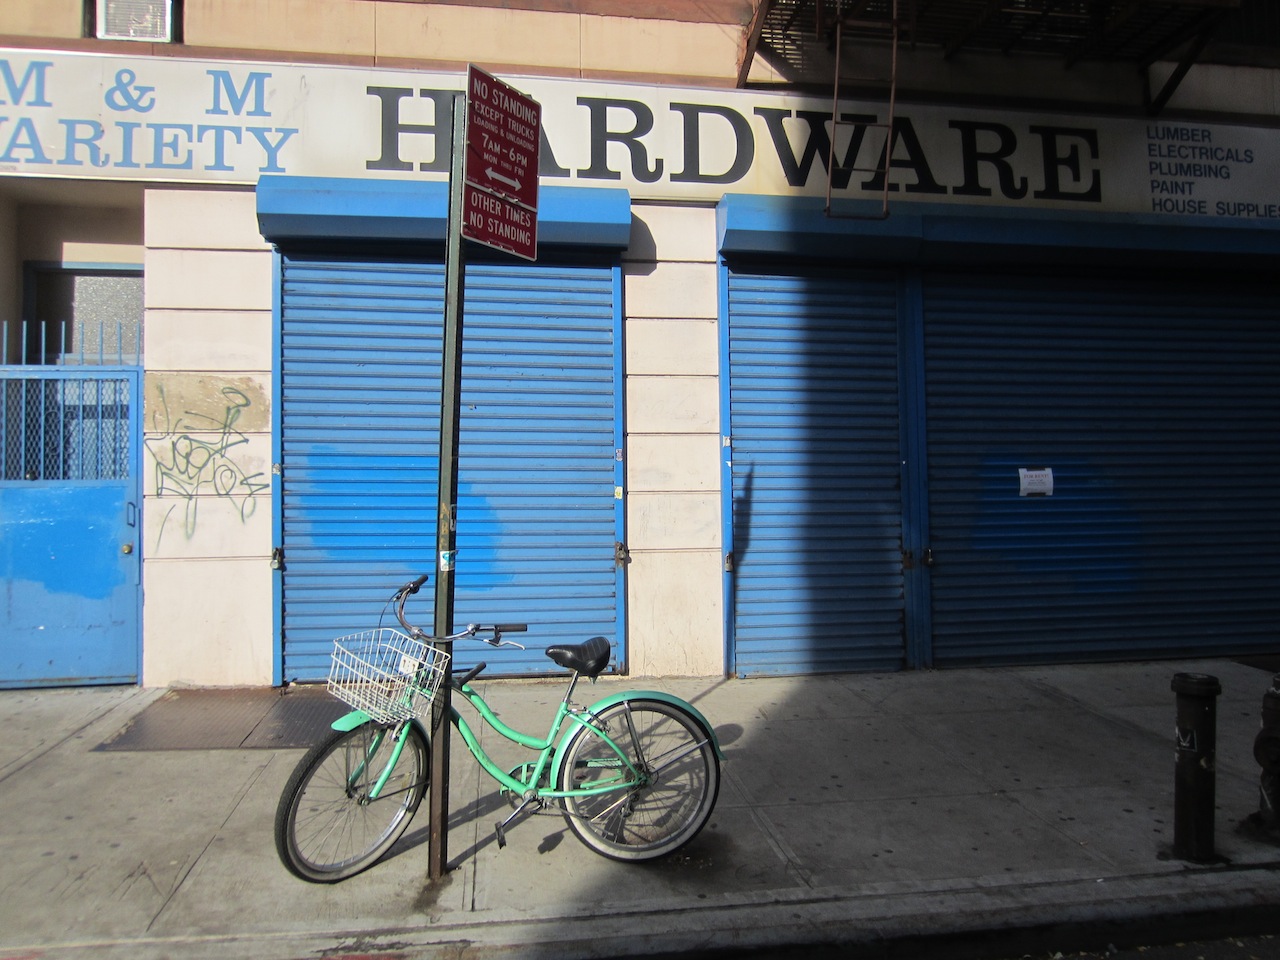 EV Grieve M&M Variety Hardware space for rent on Avenue B